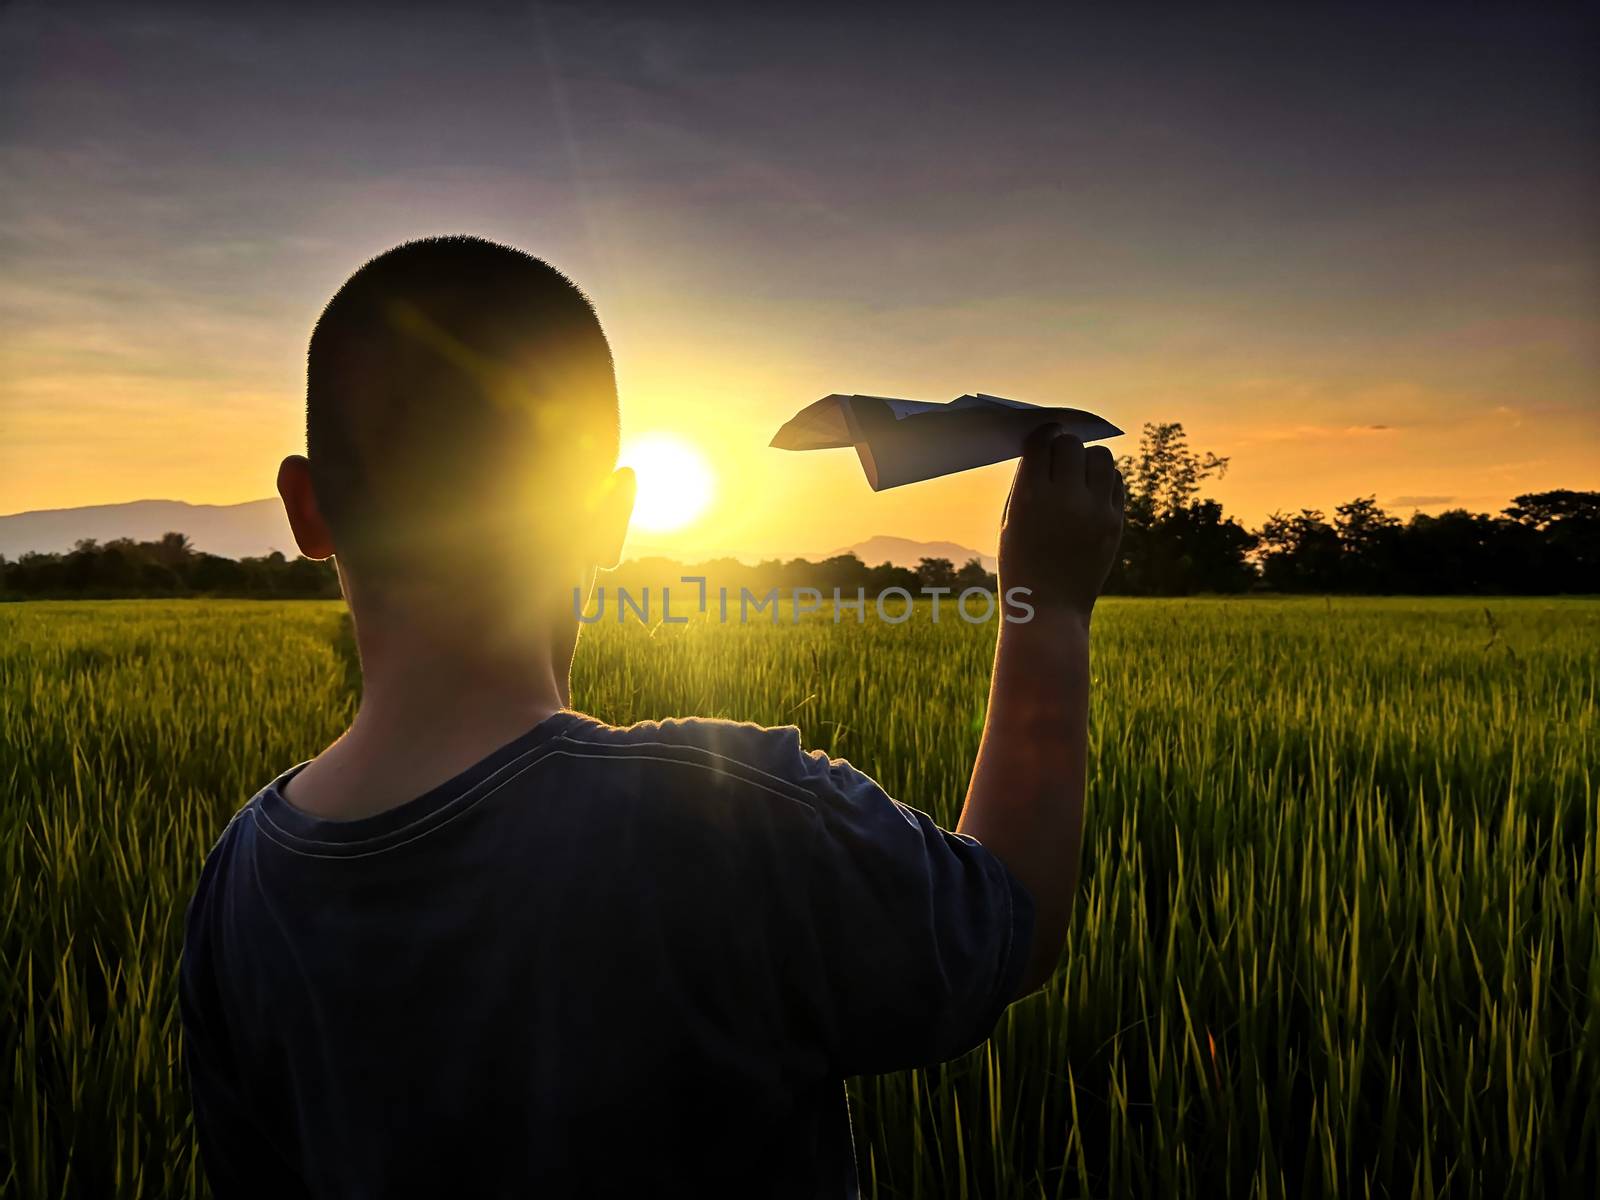 The boy is carrying a paper plane that is ready to throw into the rice fields at sunset.